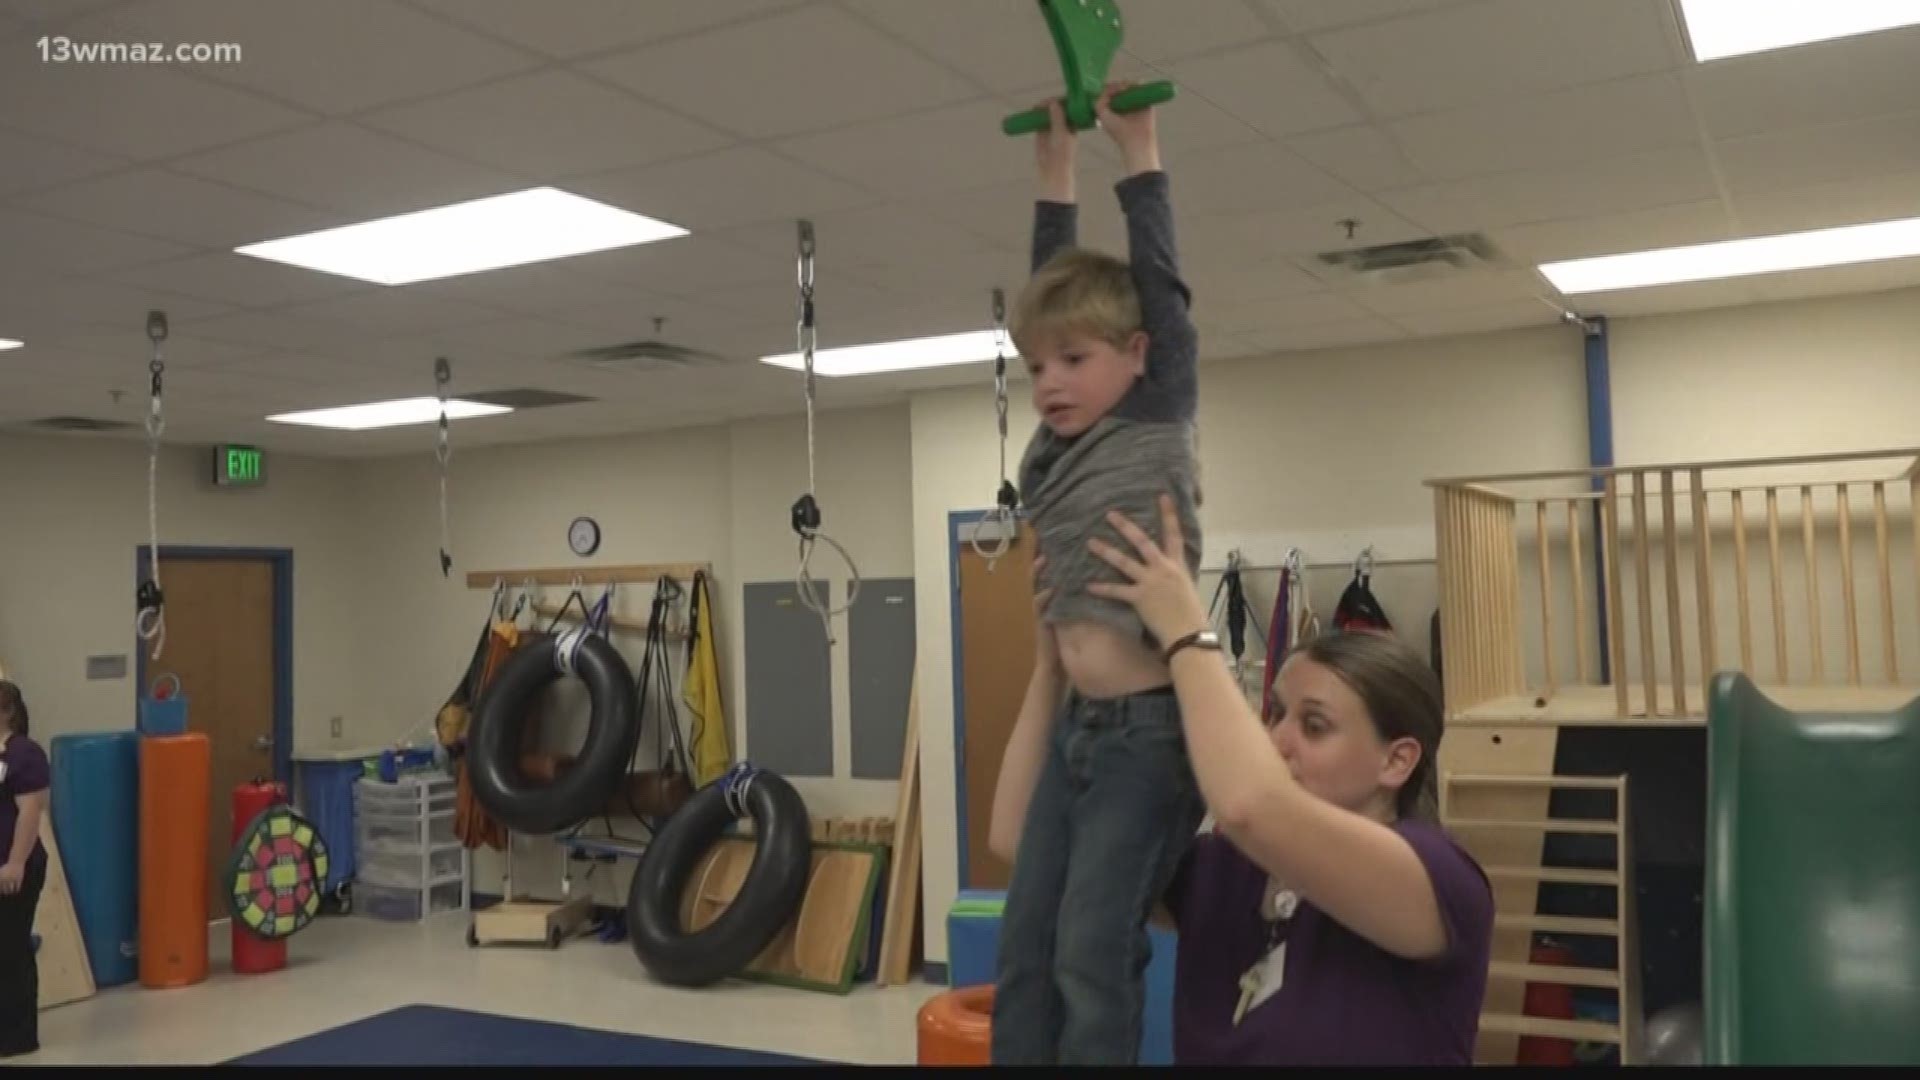 Many of the patients come to the Children's Hospital for everything from support to therapy to treatment. Kyler Pike is one of those patients, but the little guy isn't letting a difficult diagnosis slow him down.